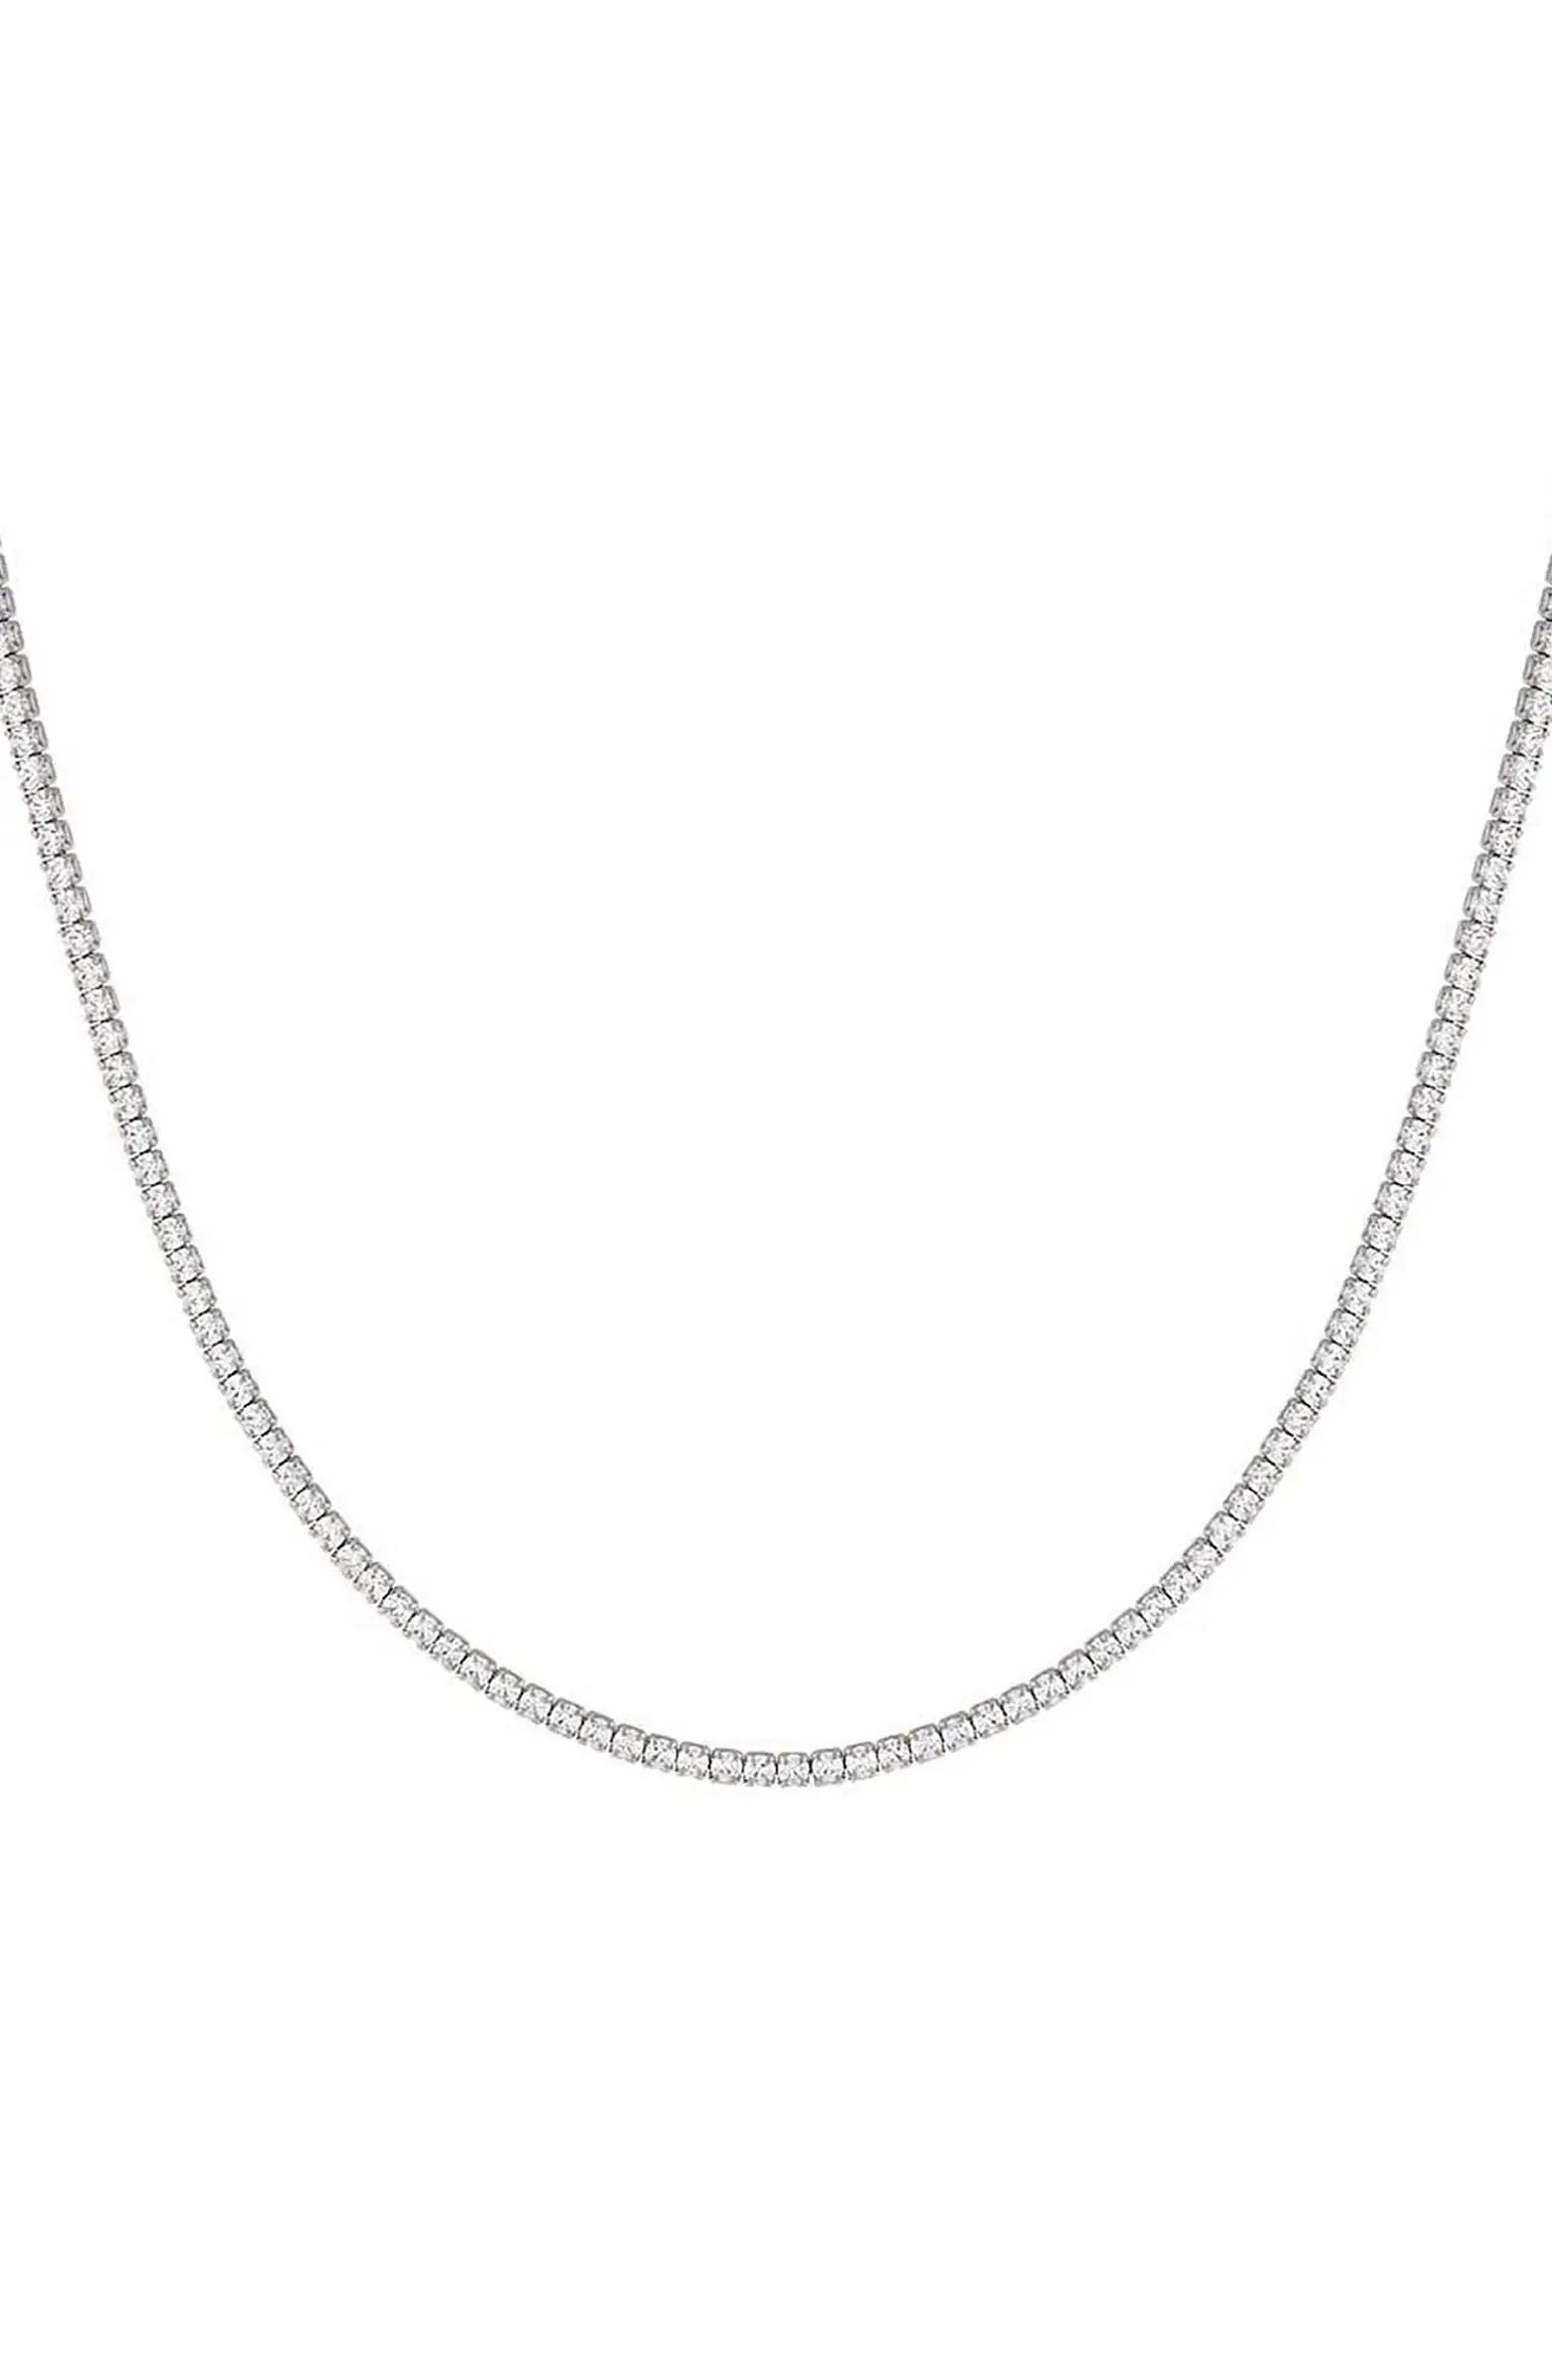 Classic Thin Cubic Zirconia Tennis Necklace | Nordstrom